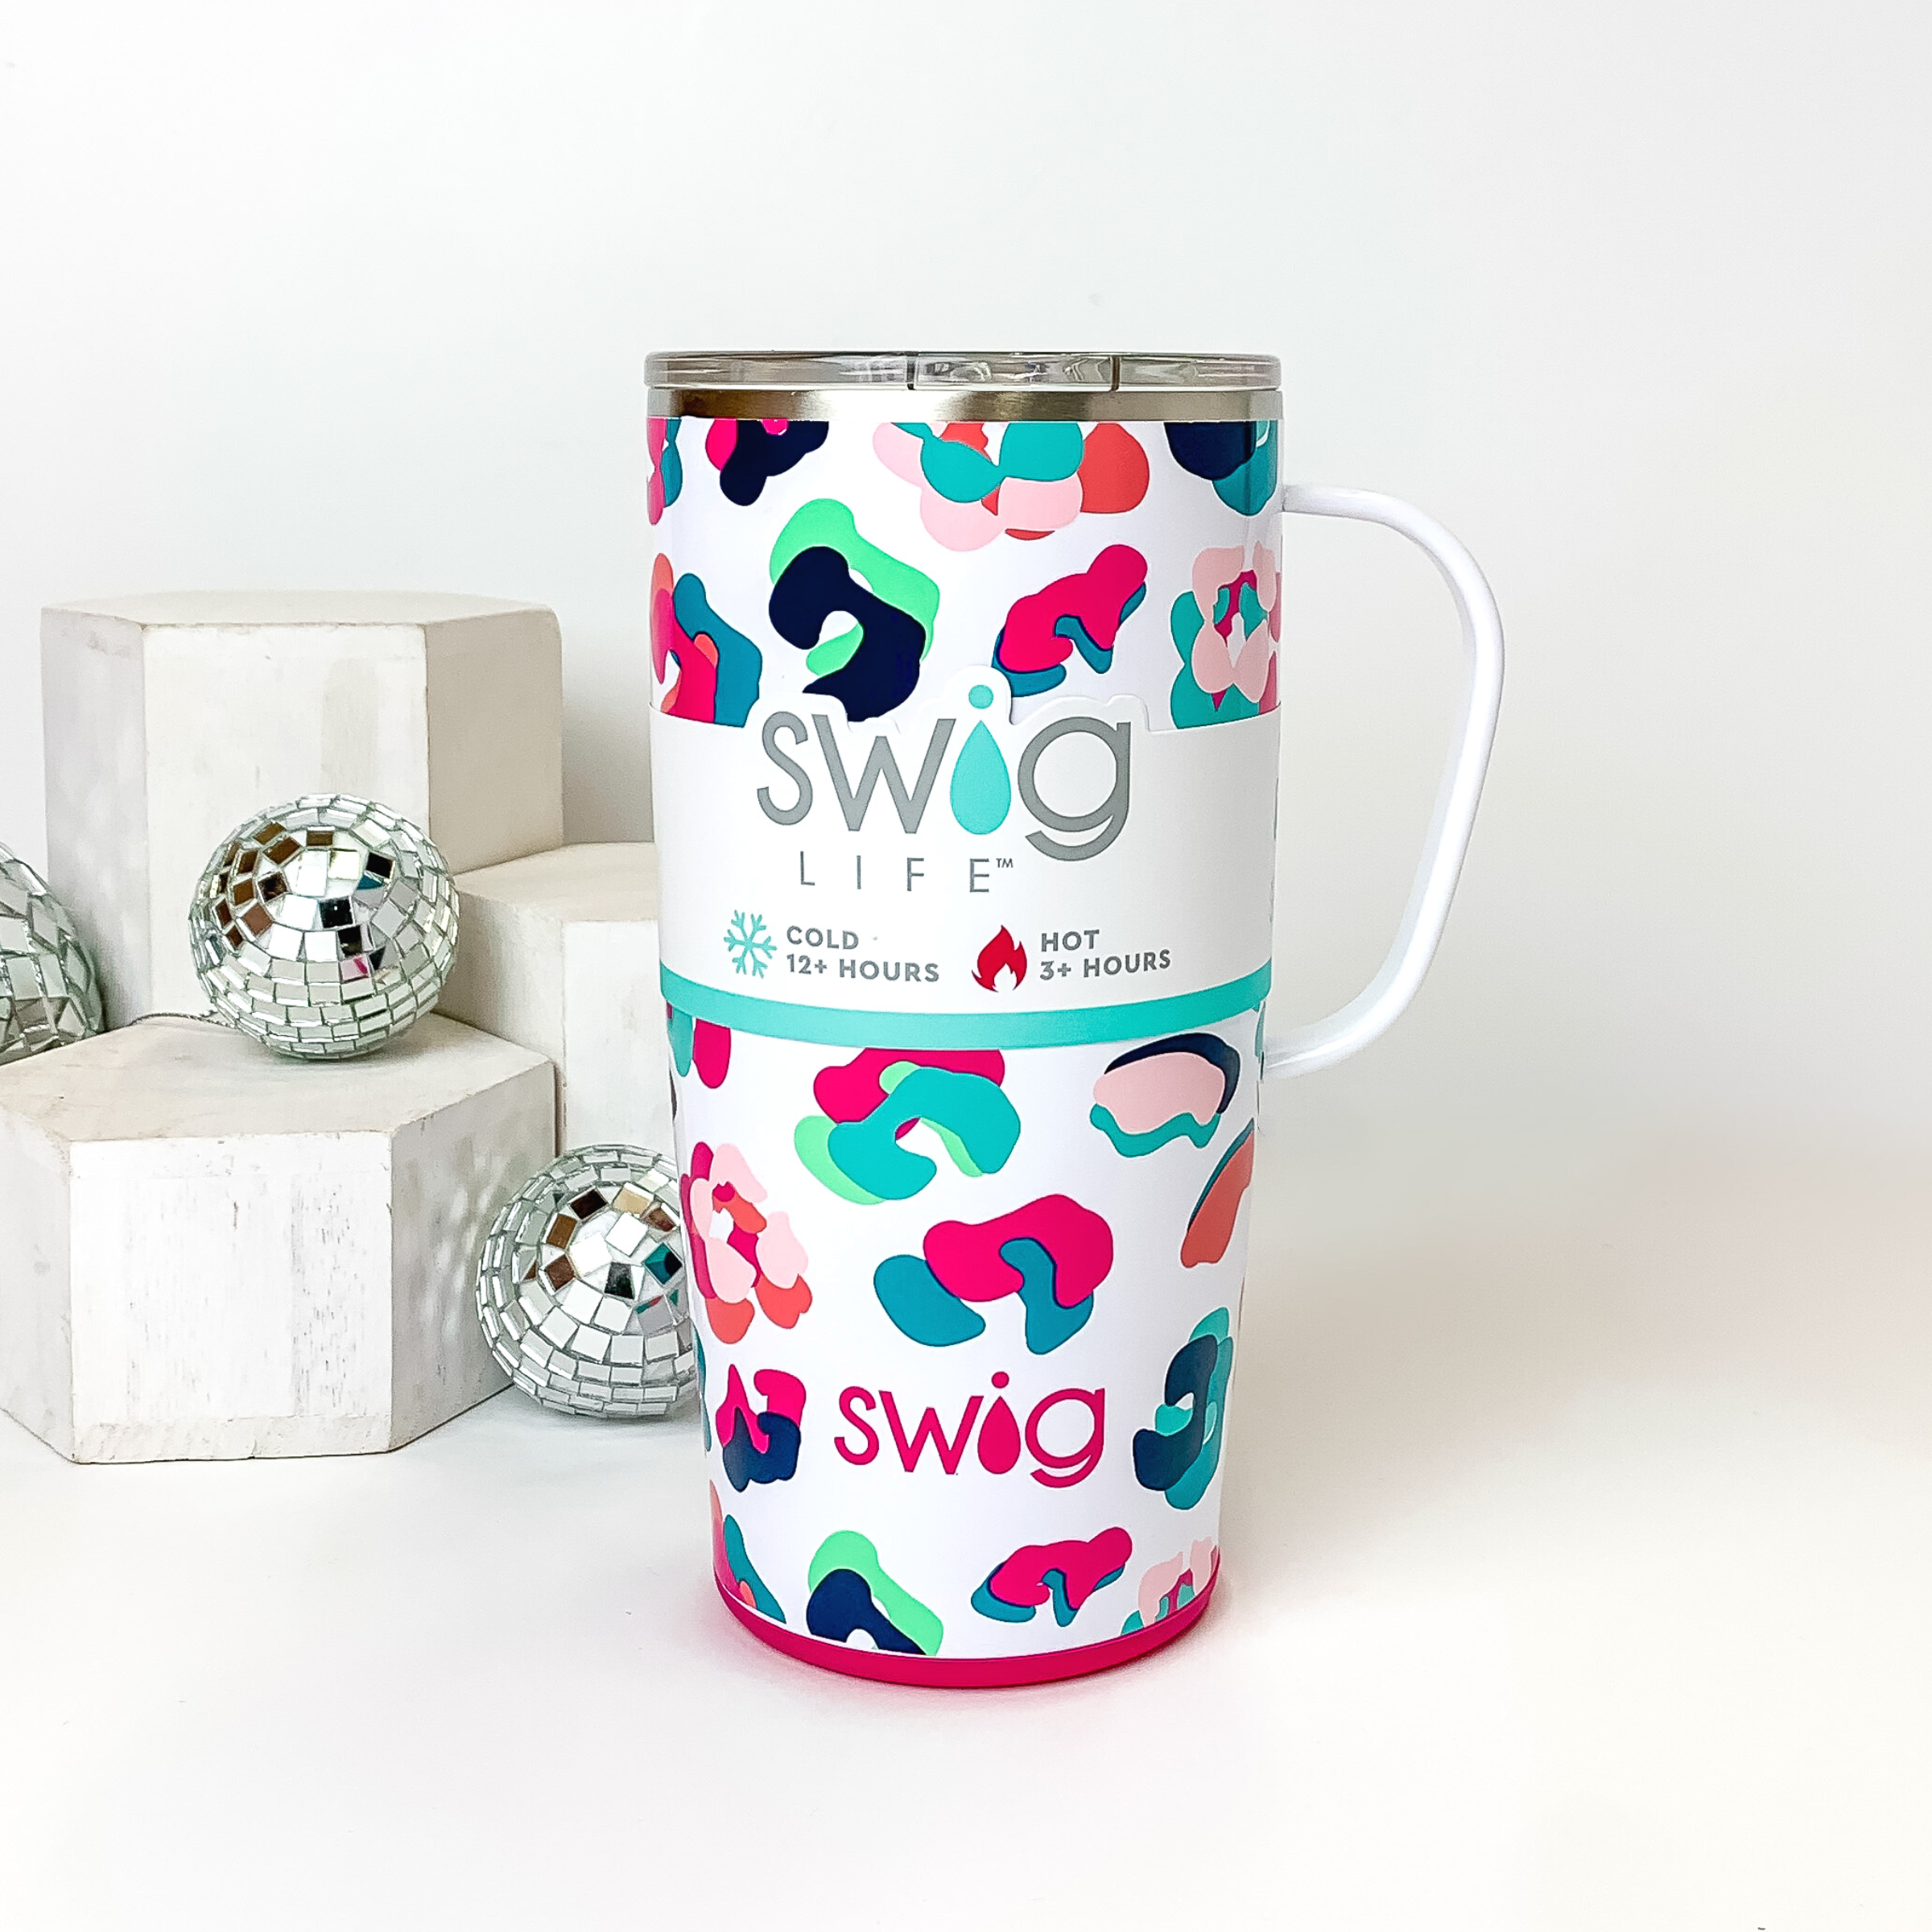 White mug with a clear lid and white handle. This mug has neon multicolored leopard print. This mug is pictured on a white background with white blocks and disco balls on the left side of the picture. 